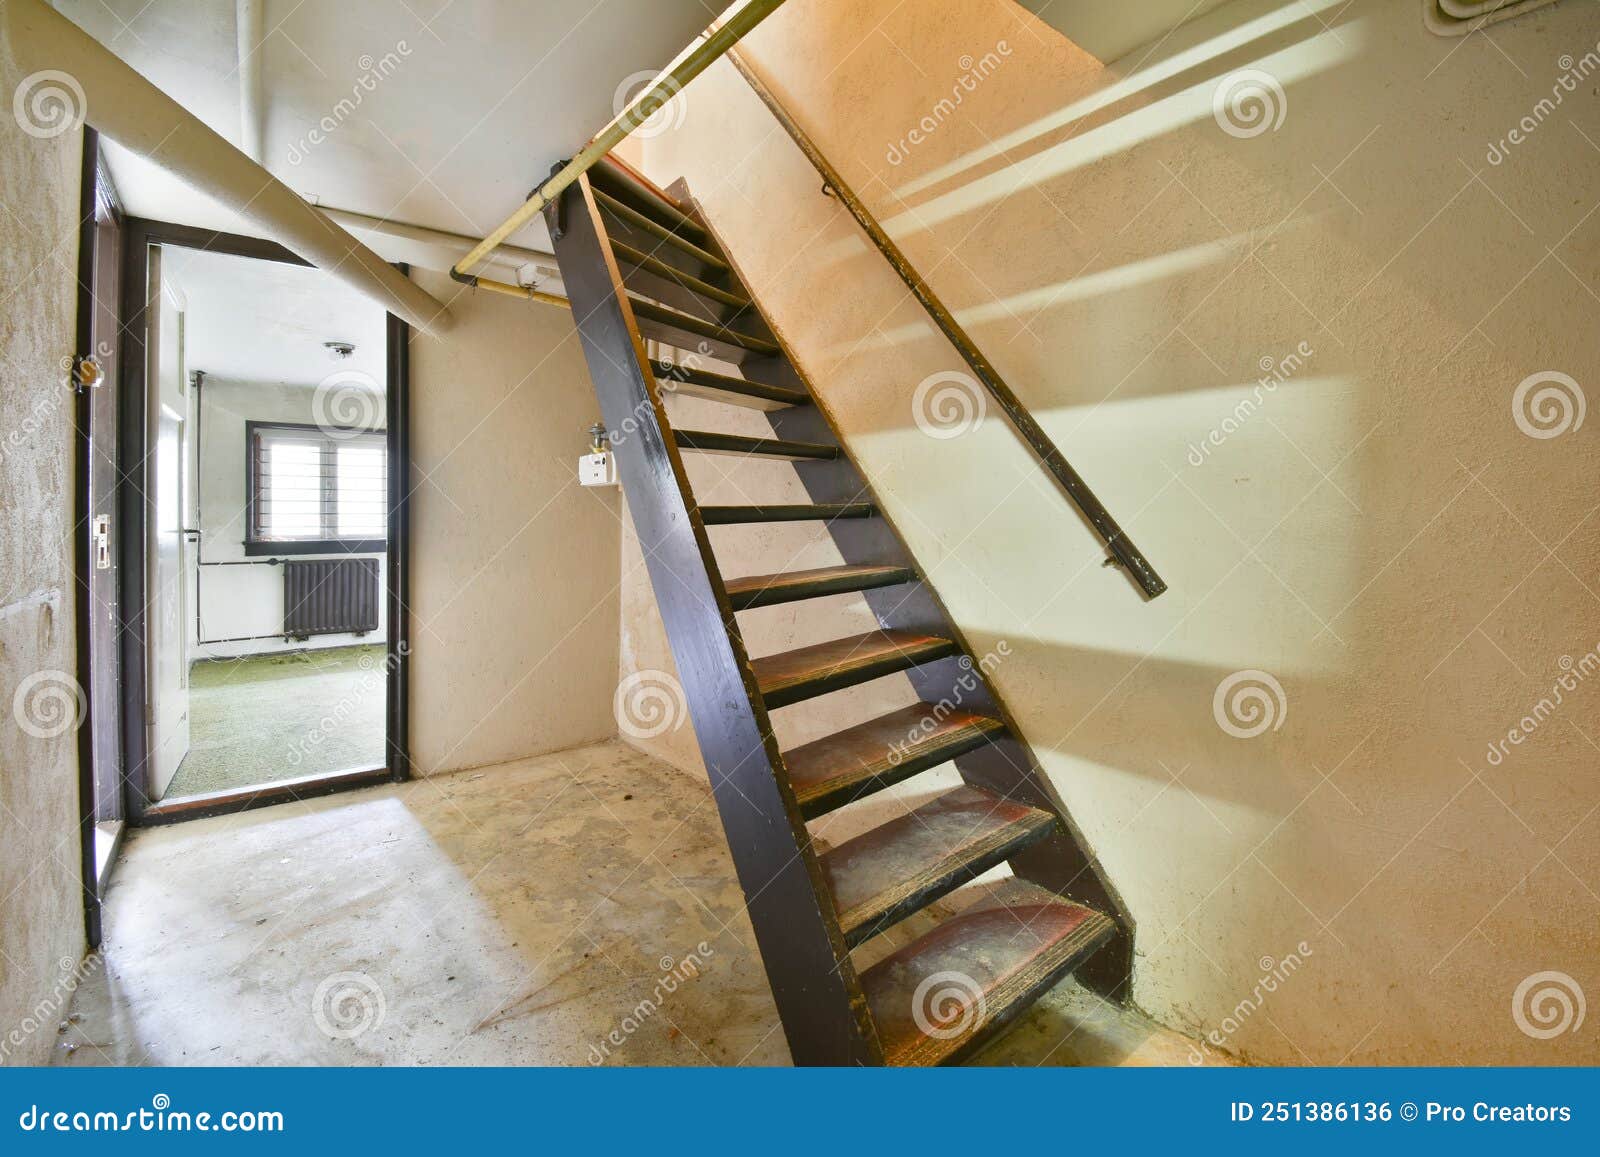 Wooden Staircase in Spacious Hall of Apartment Stock Photo - Image of ...